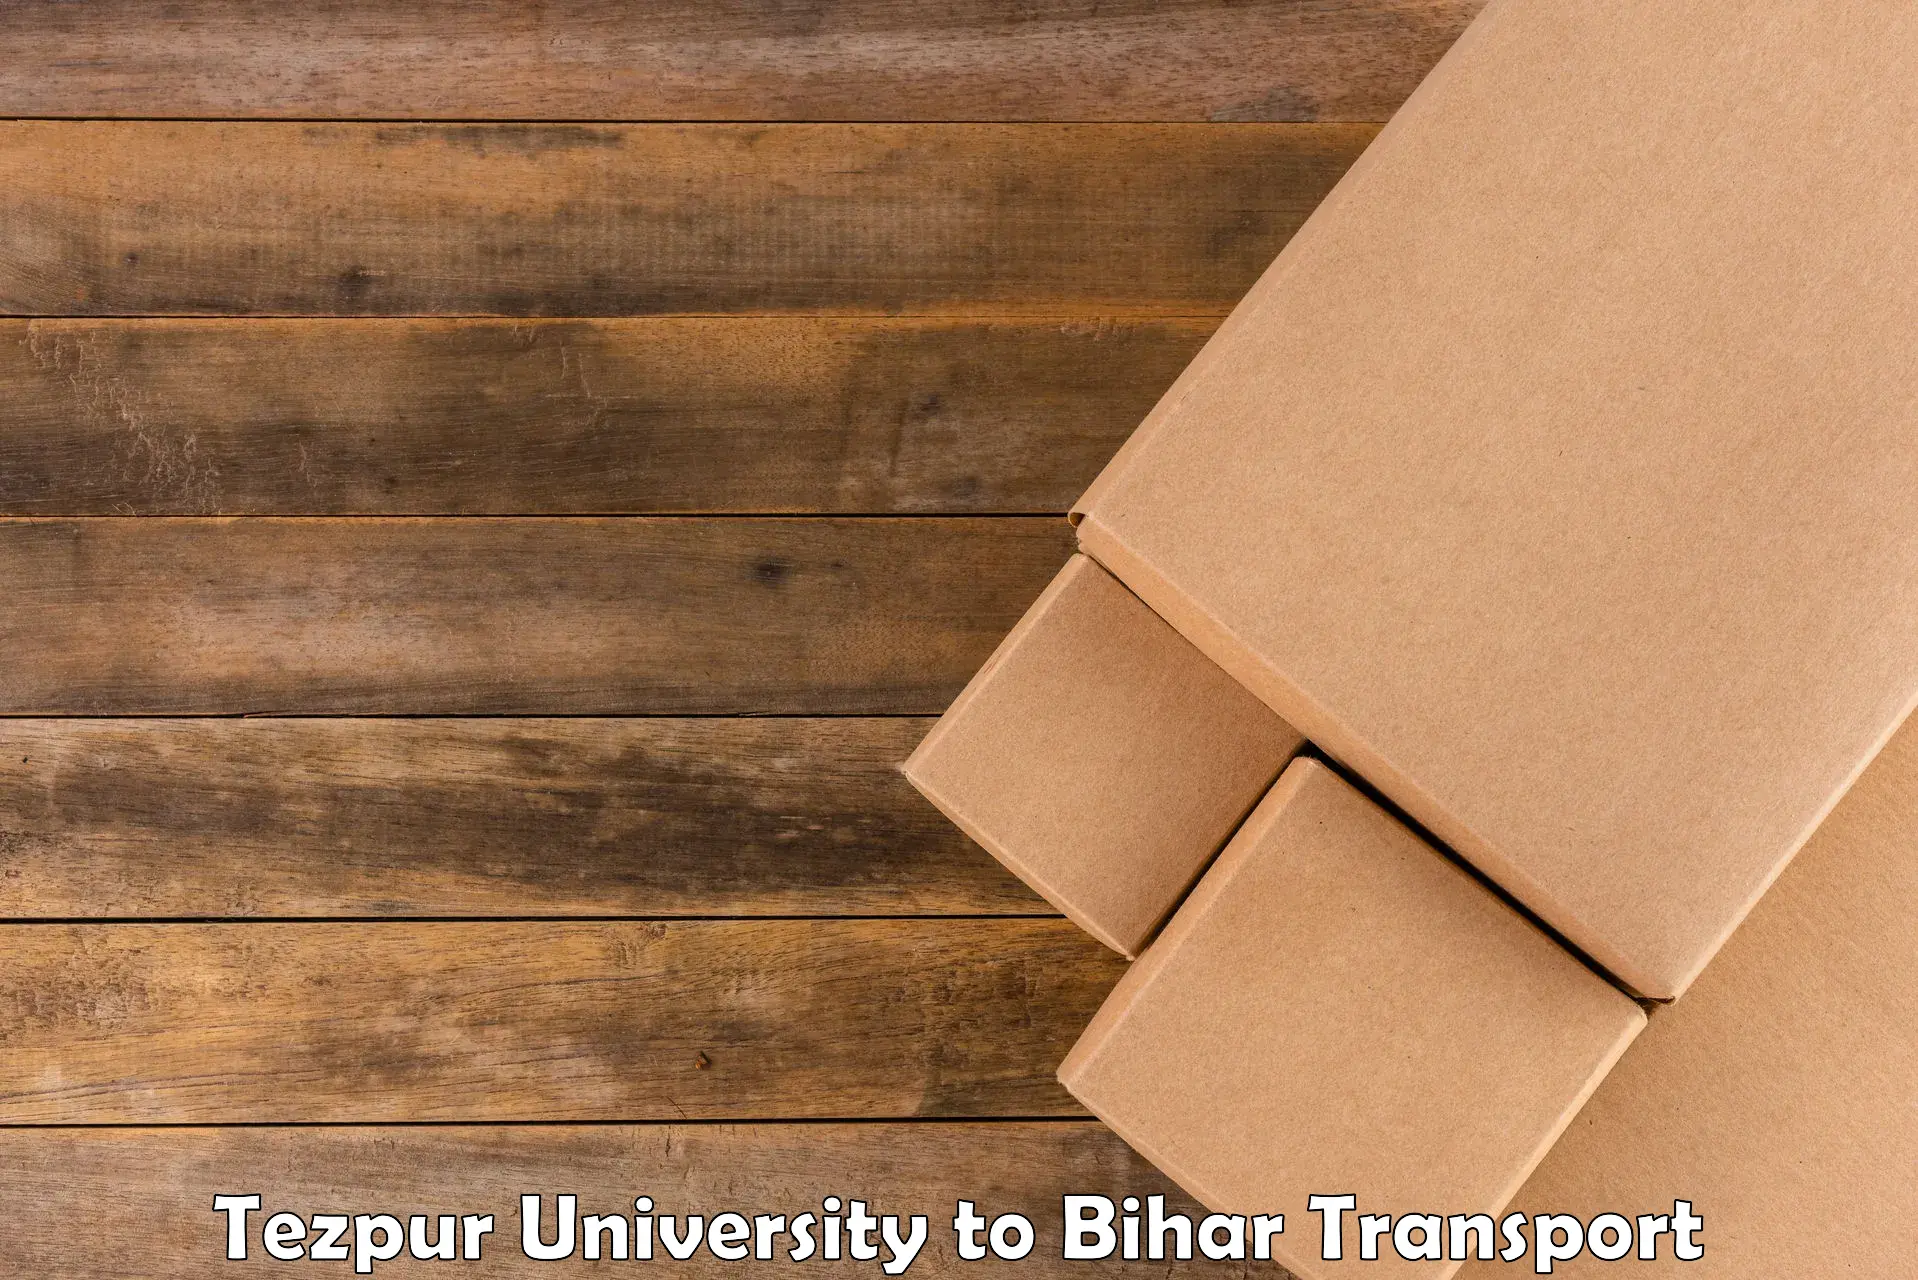 Goods delivery service Tezpur University to Motipur